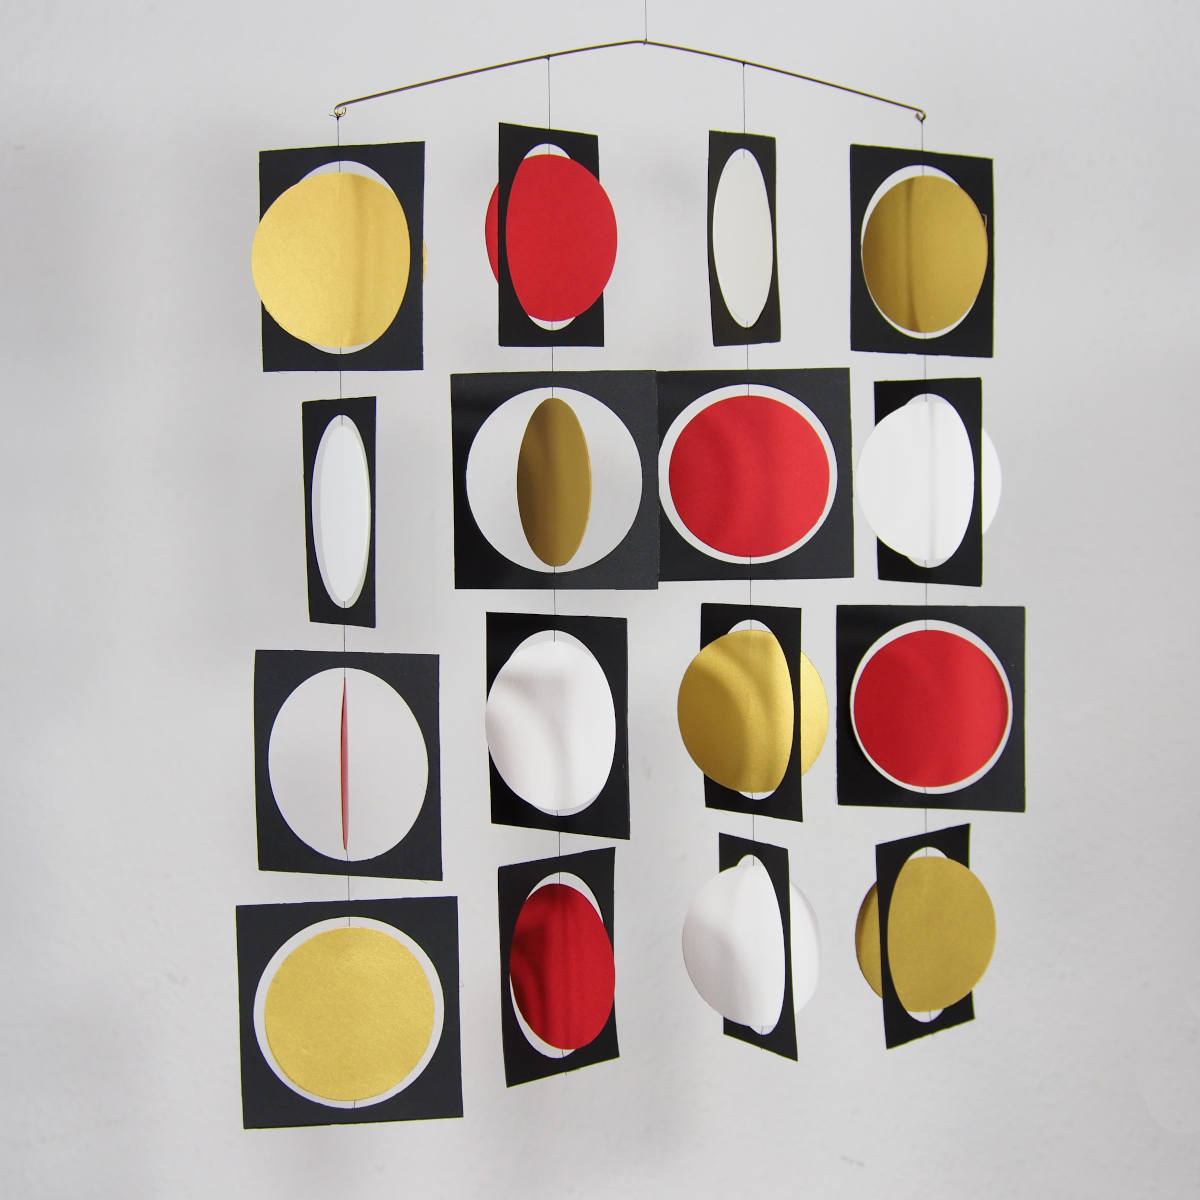 Design Mobile "16" with Colored Squares and Circles (42 x 44 cm)